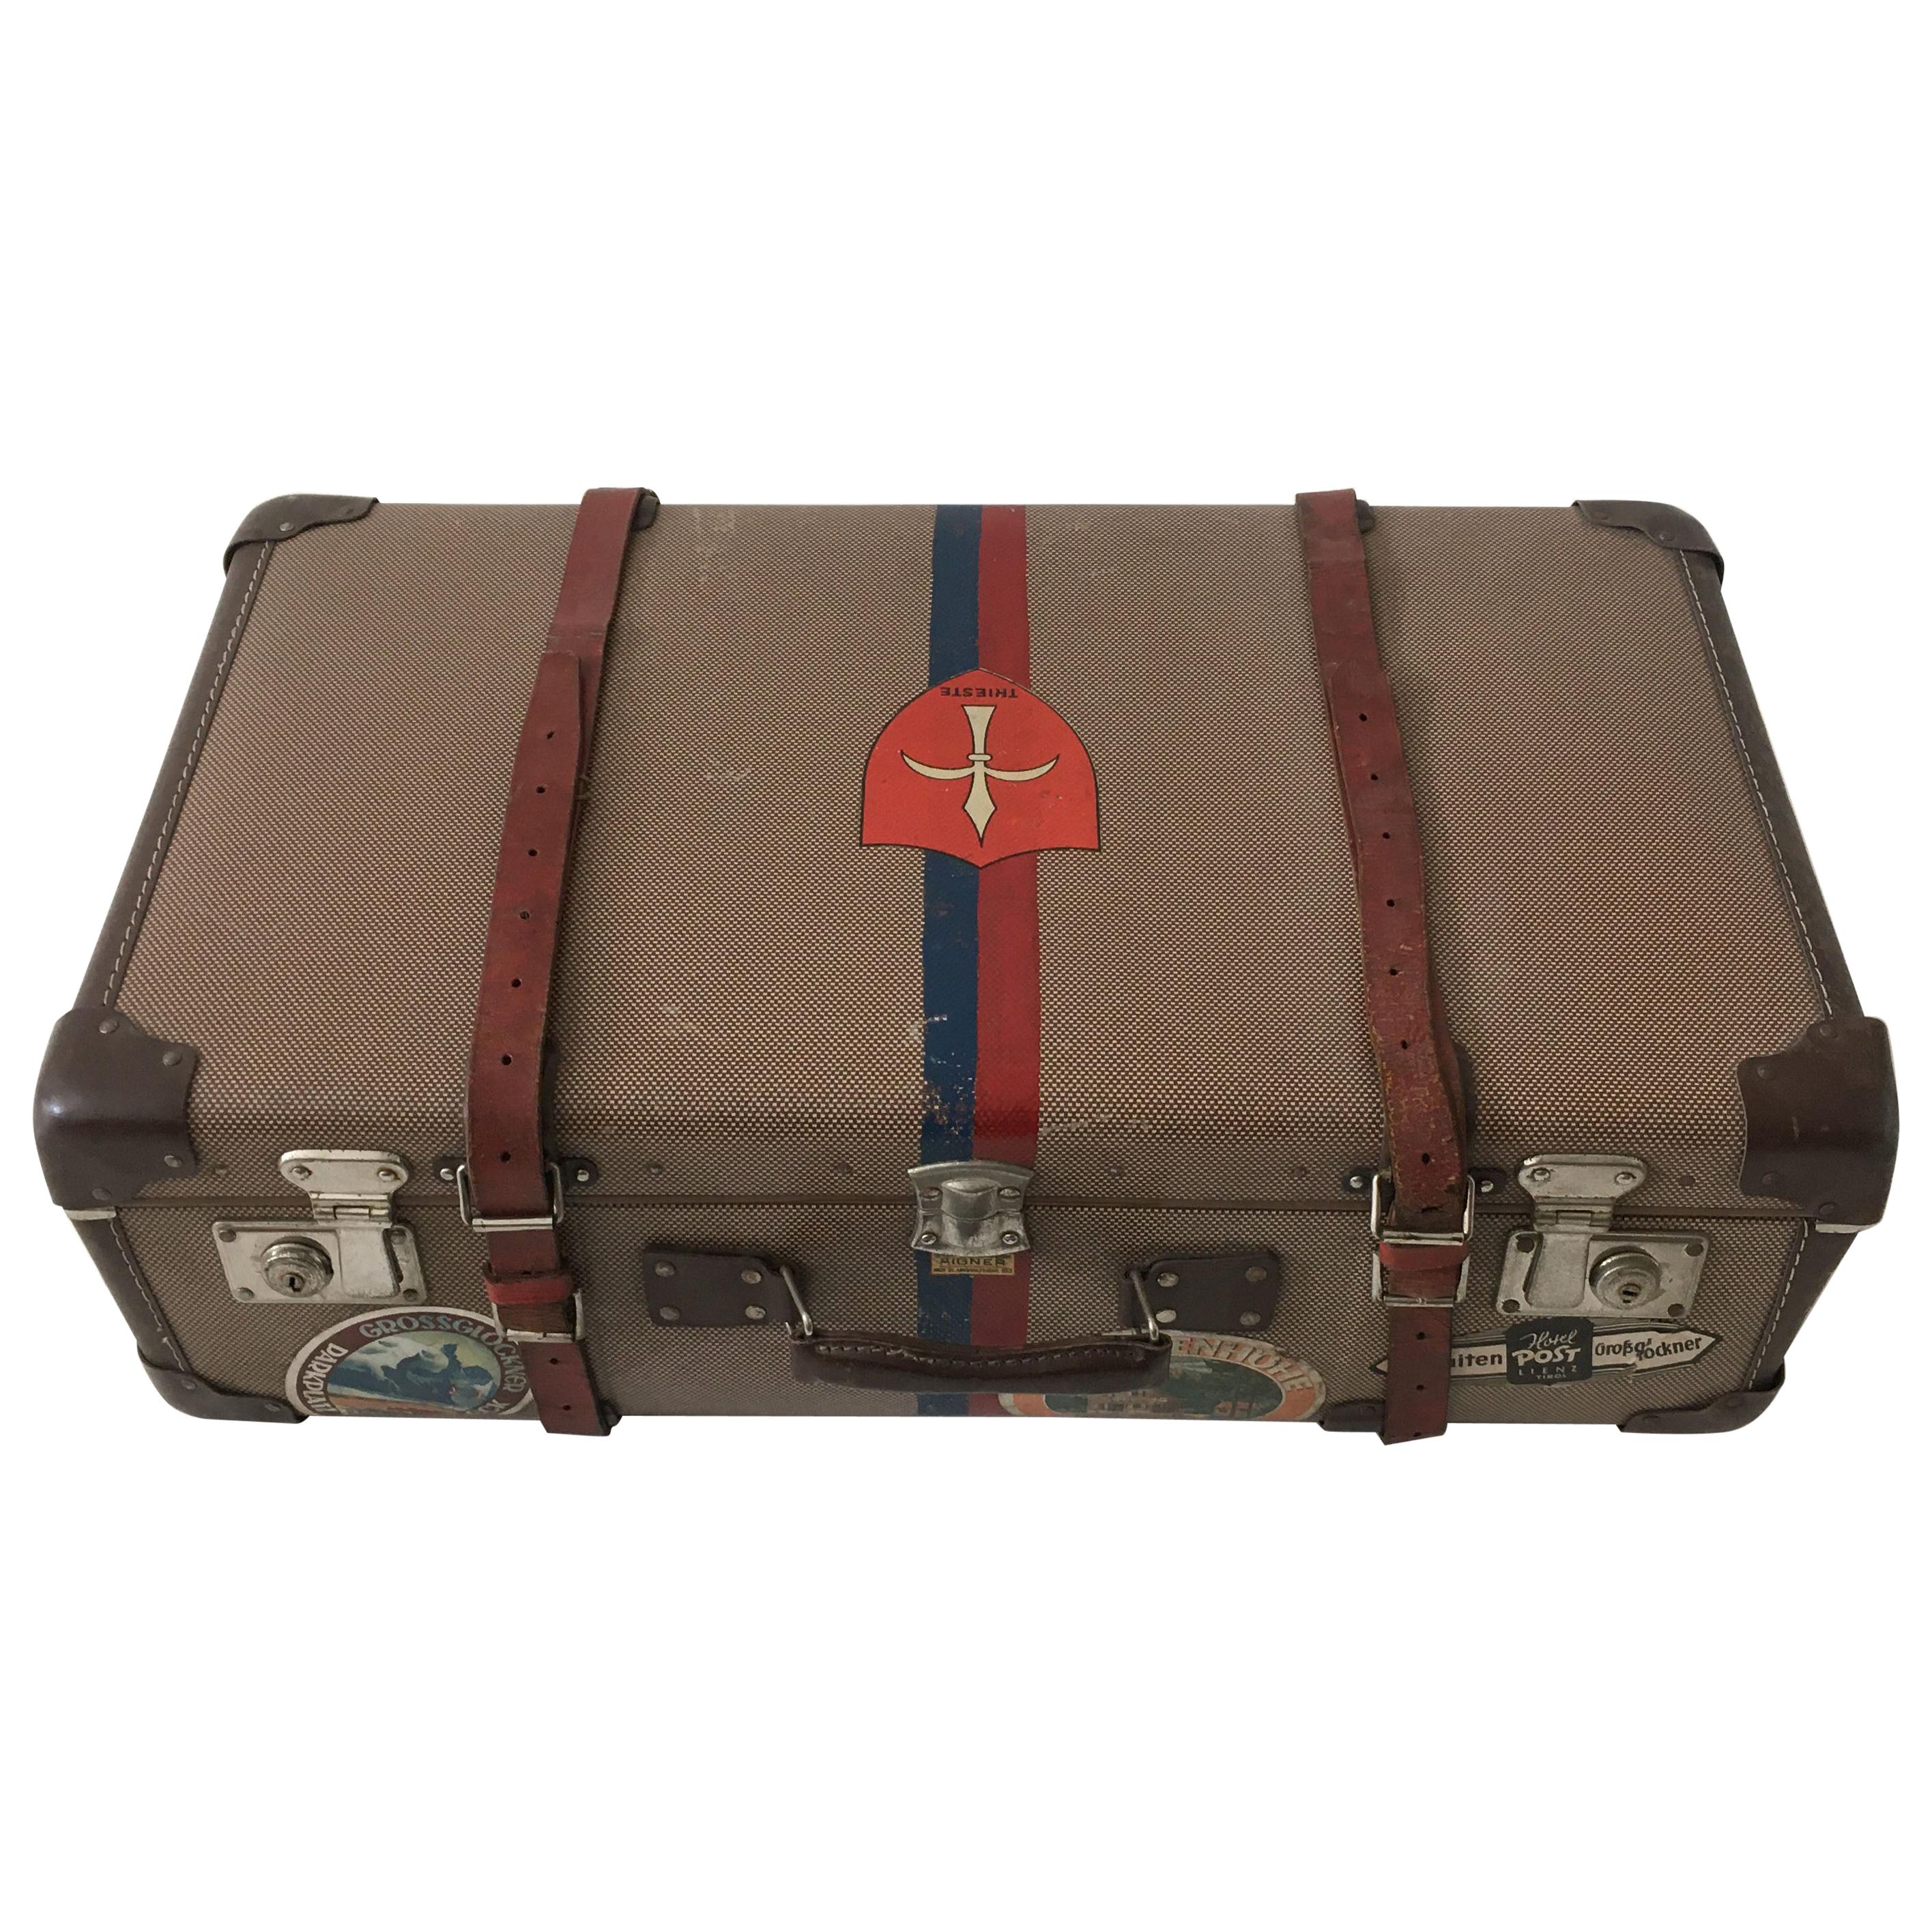 Adler Koffer Luggage with Painted Coat of Arms, Crest of Trieste, Austria 1930s